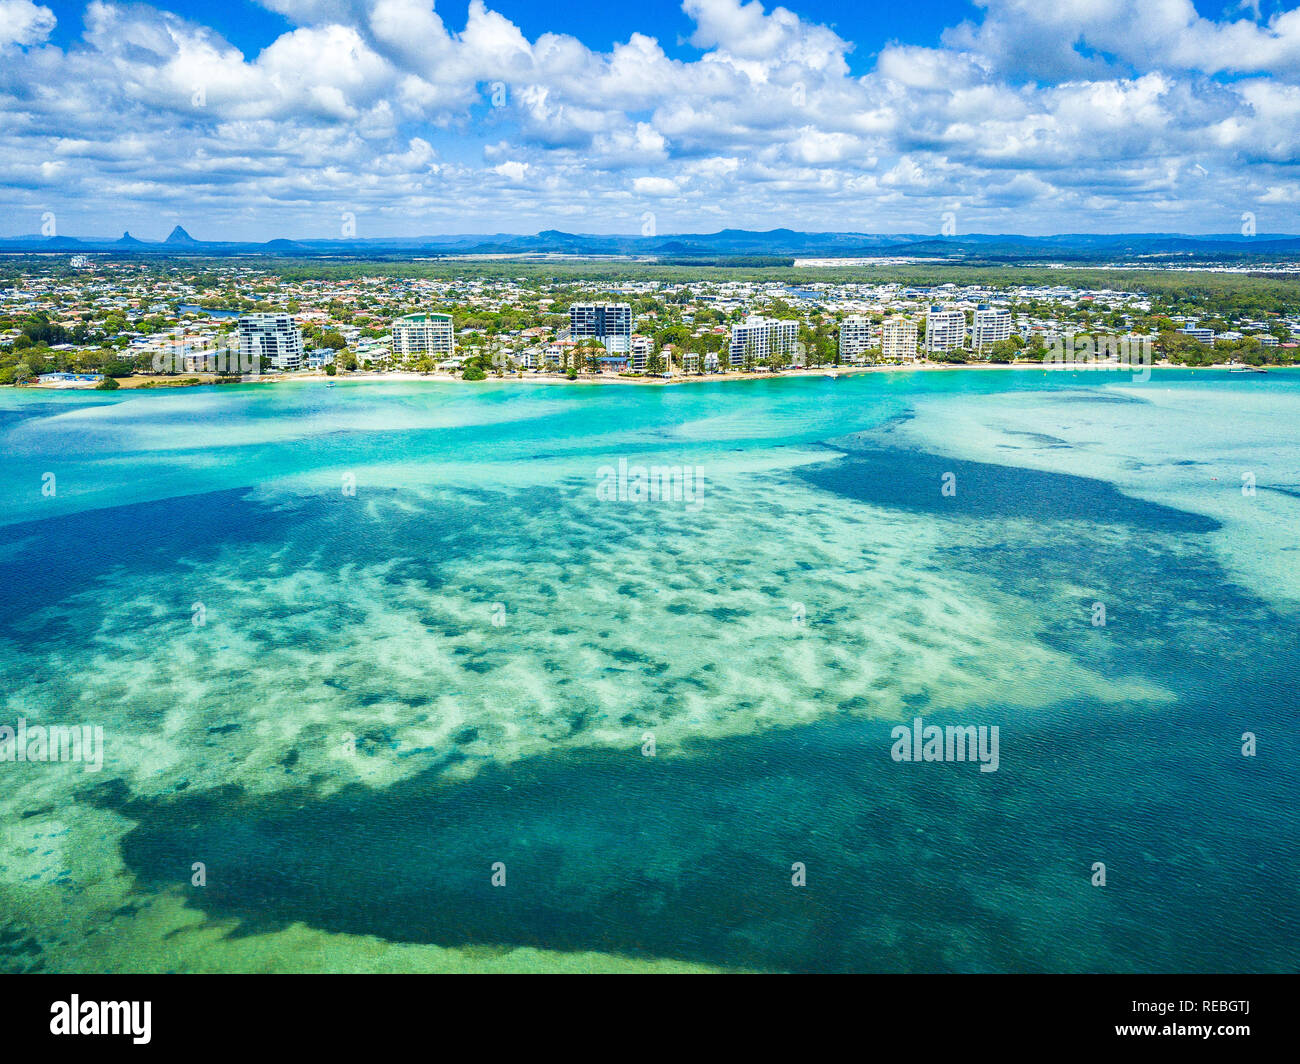 Aerial view of Golden Beach and the Caloundra area across through the Pumicestone Passage on the Sunshine Coast in Queensland, Australia. Stock Photo